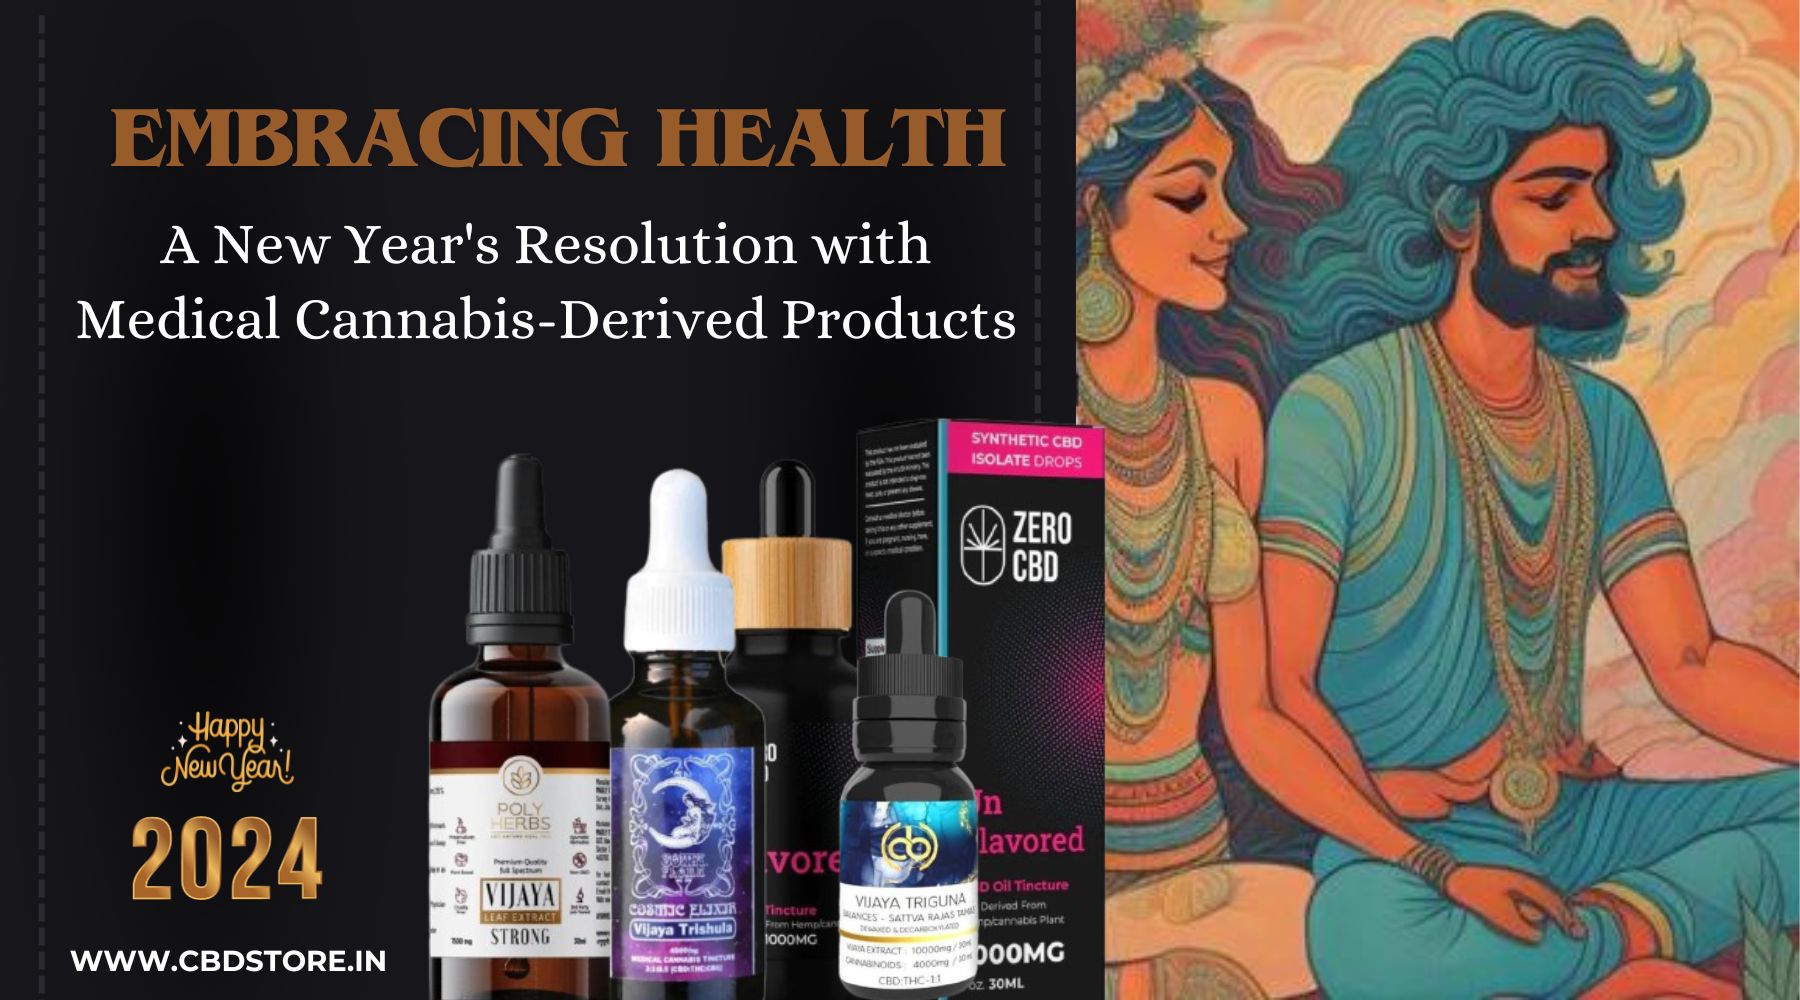 Embracing Health: A New Year's Resolution with Medical Cannabis-Derived Products